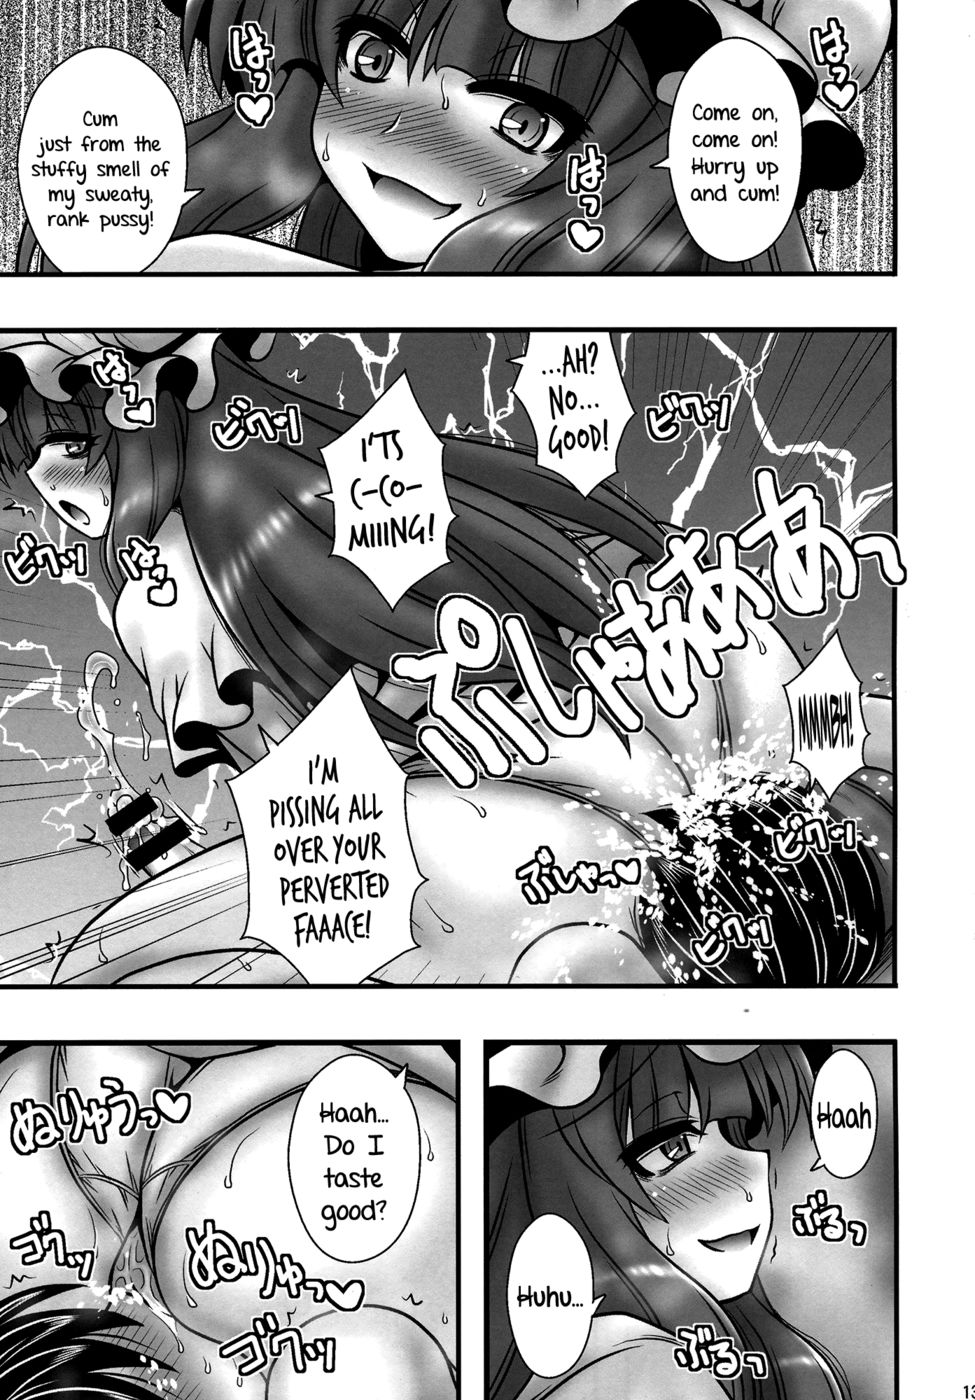 Hentai Manga Comic-The Tale of Patchouli's Reverse Rape of a Young Boy-Read-12